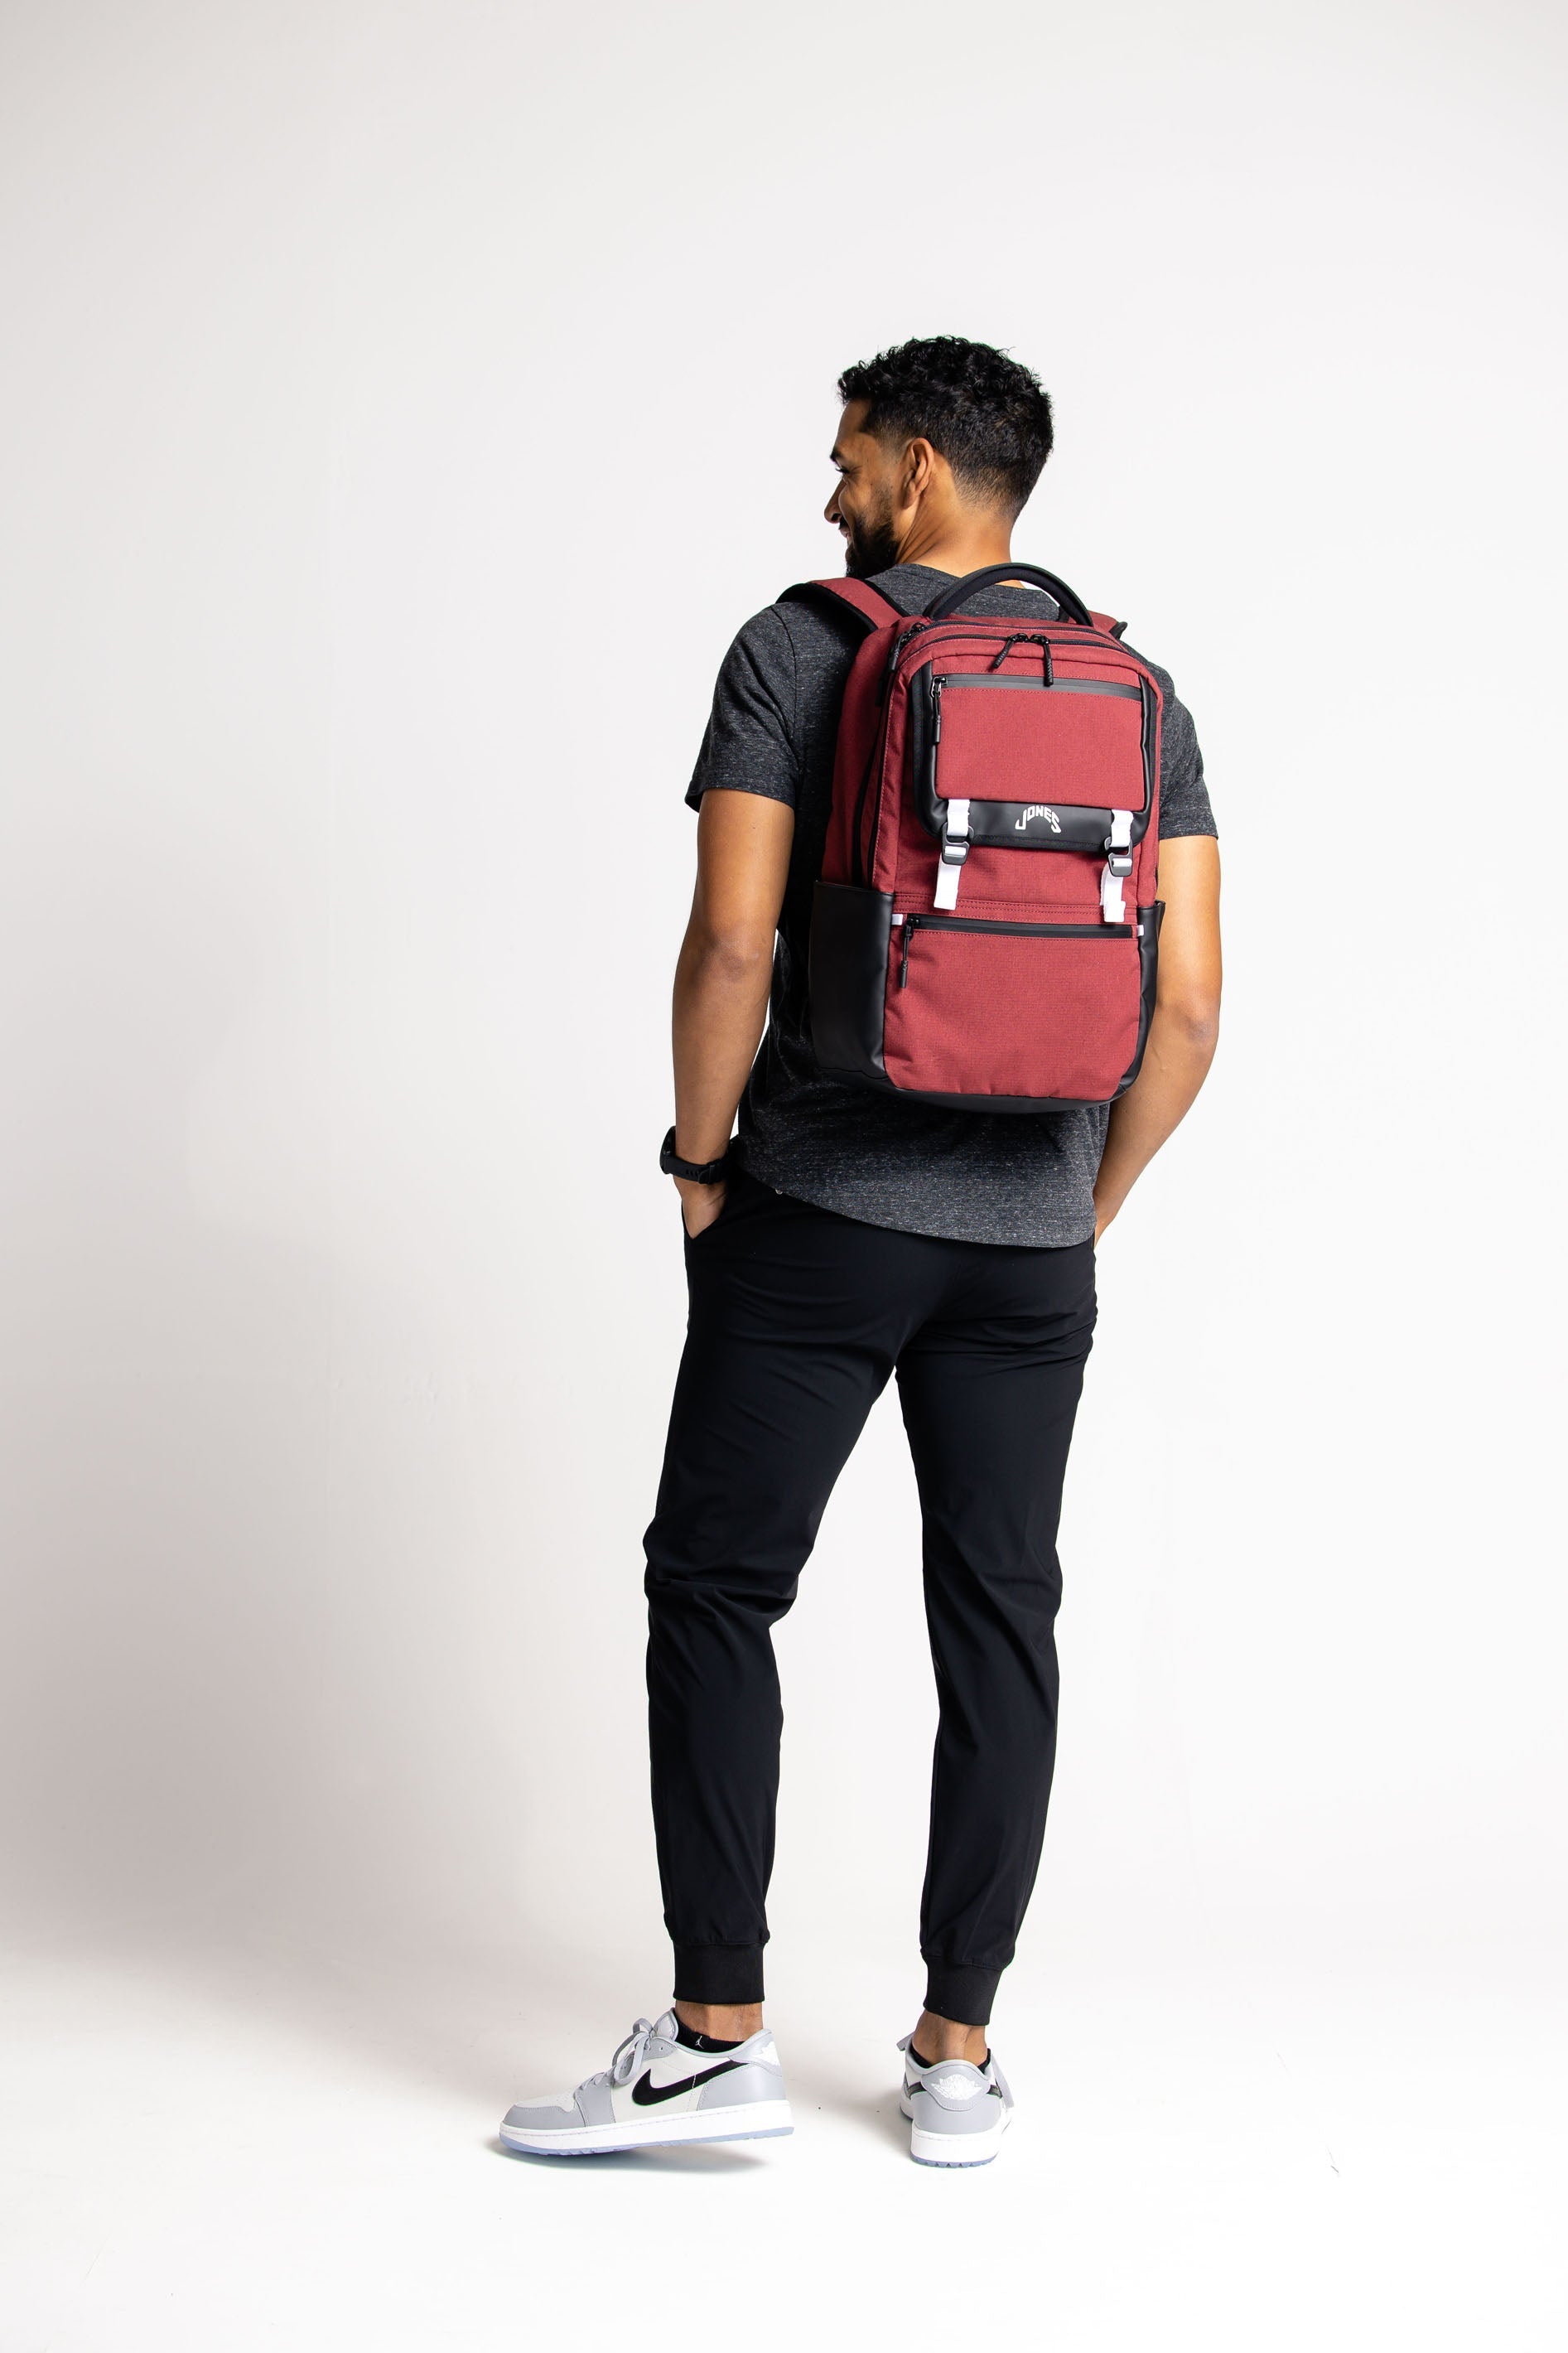 Jones Sports Co A2 Backpack R - Sonoma